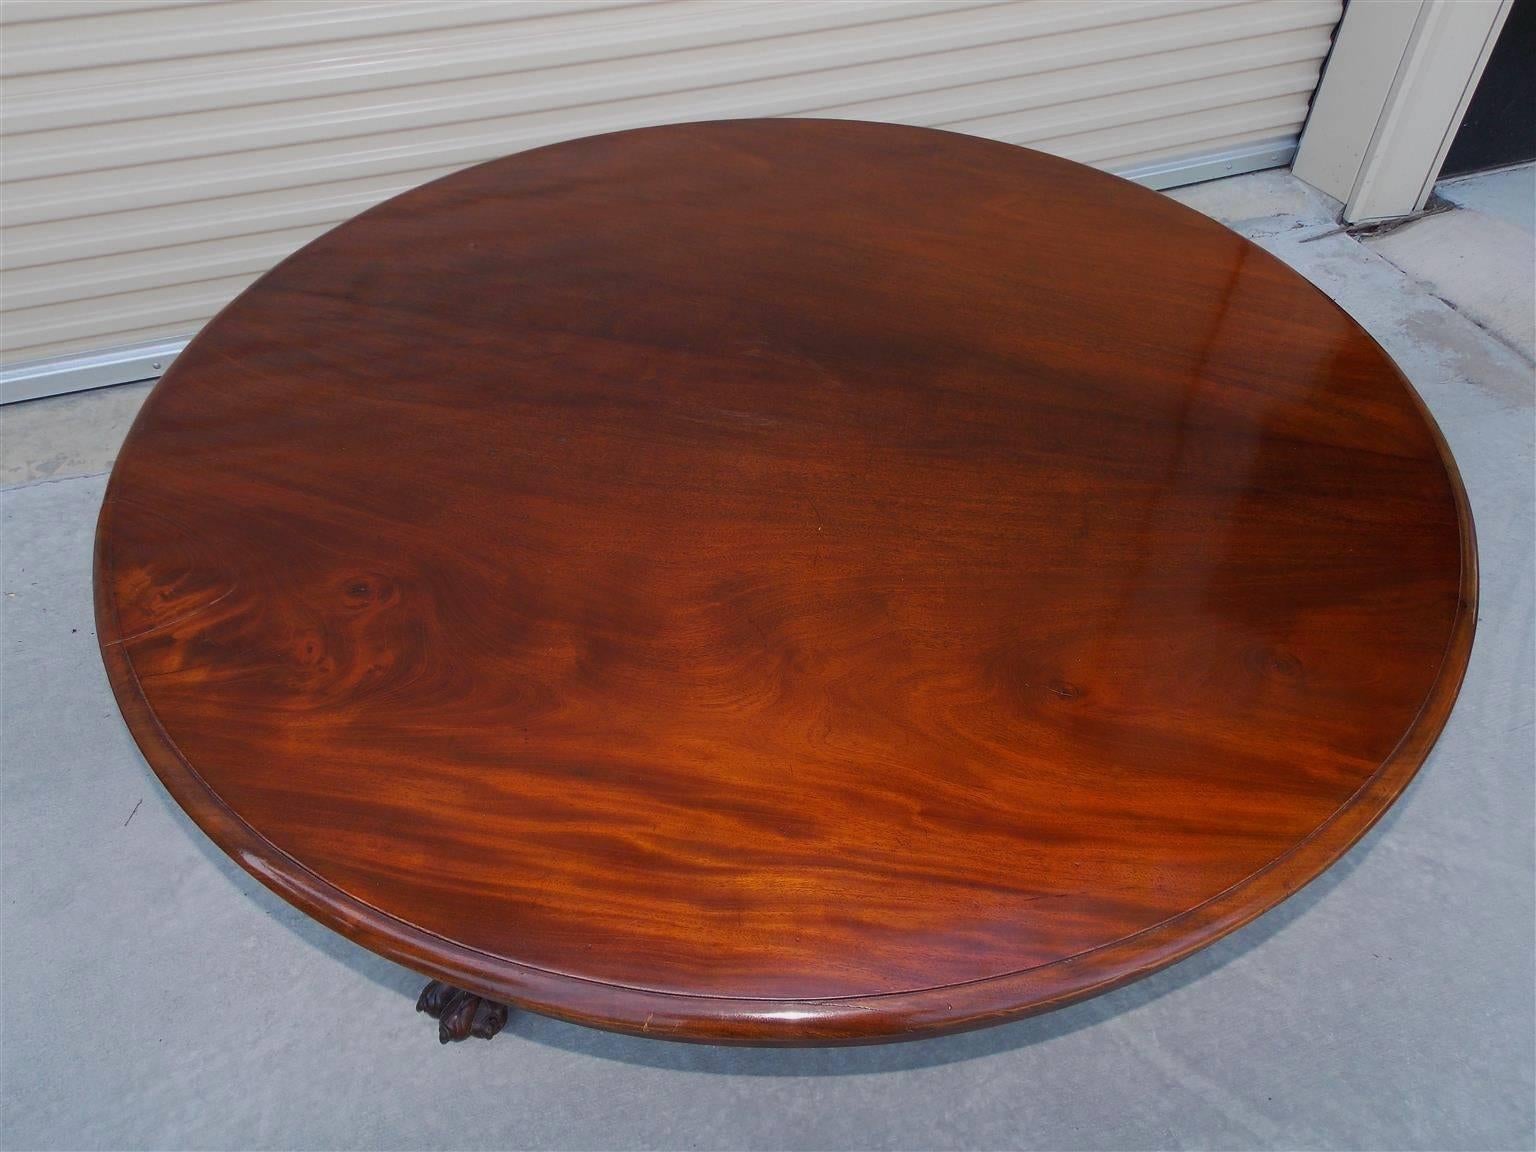 English Regency Mahogany Tilt-Top Center Table with Paw Feet, Circa 1815 In Excellent Condition For Sale In Hollywood, SC